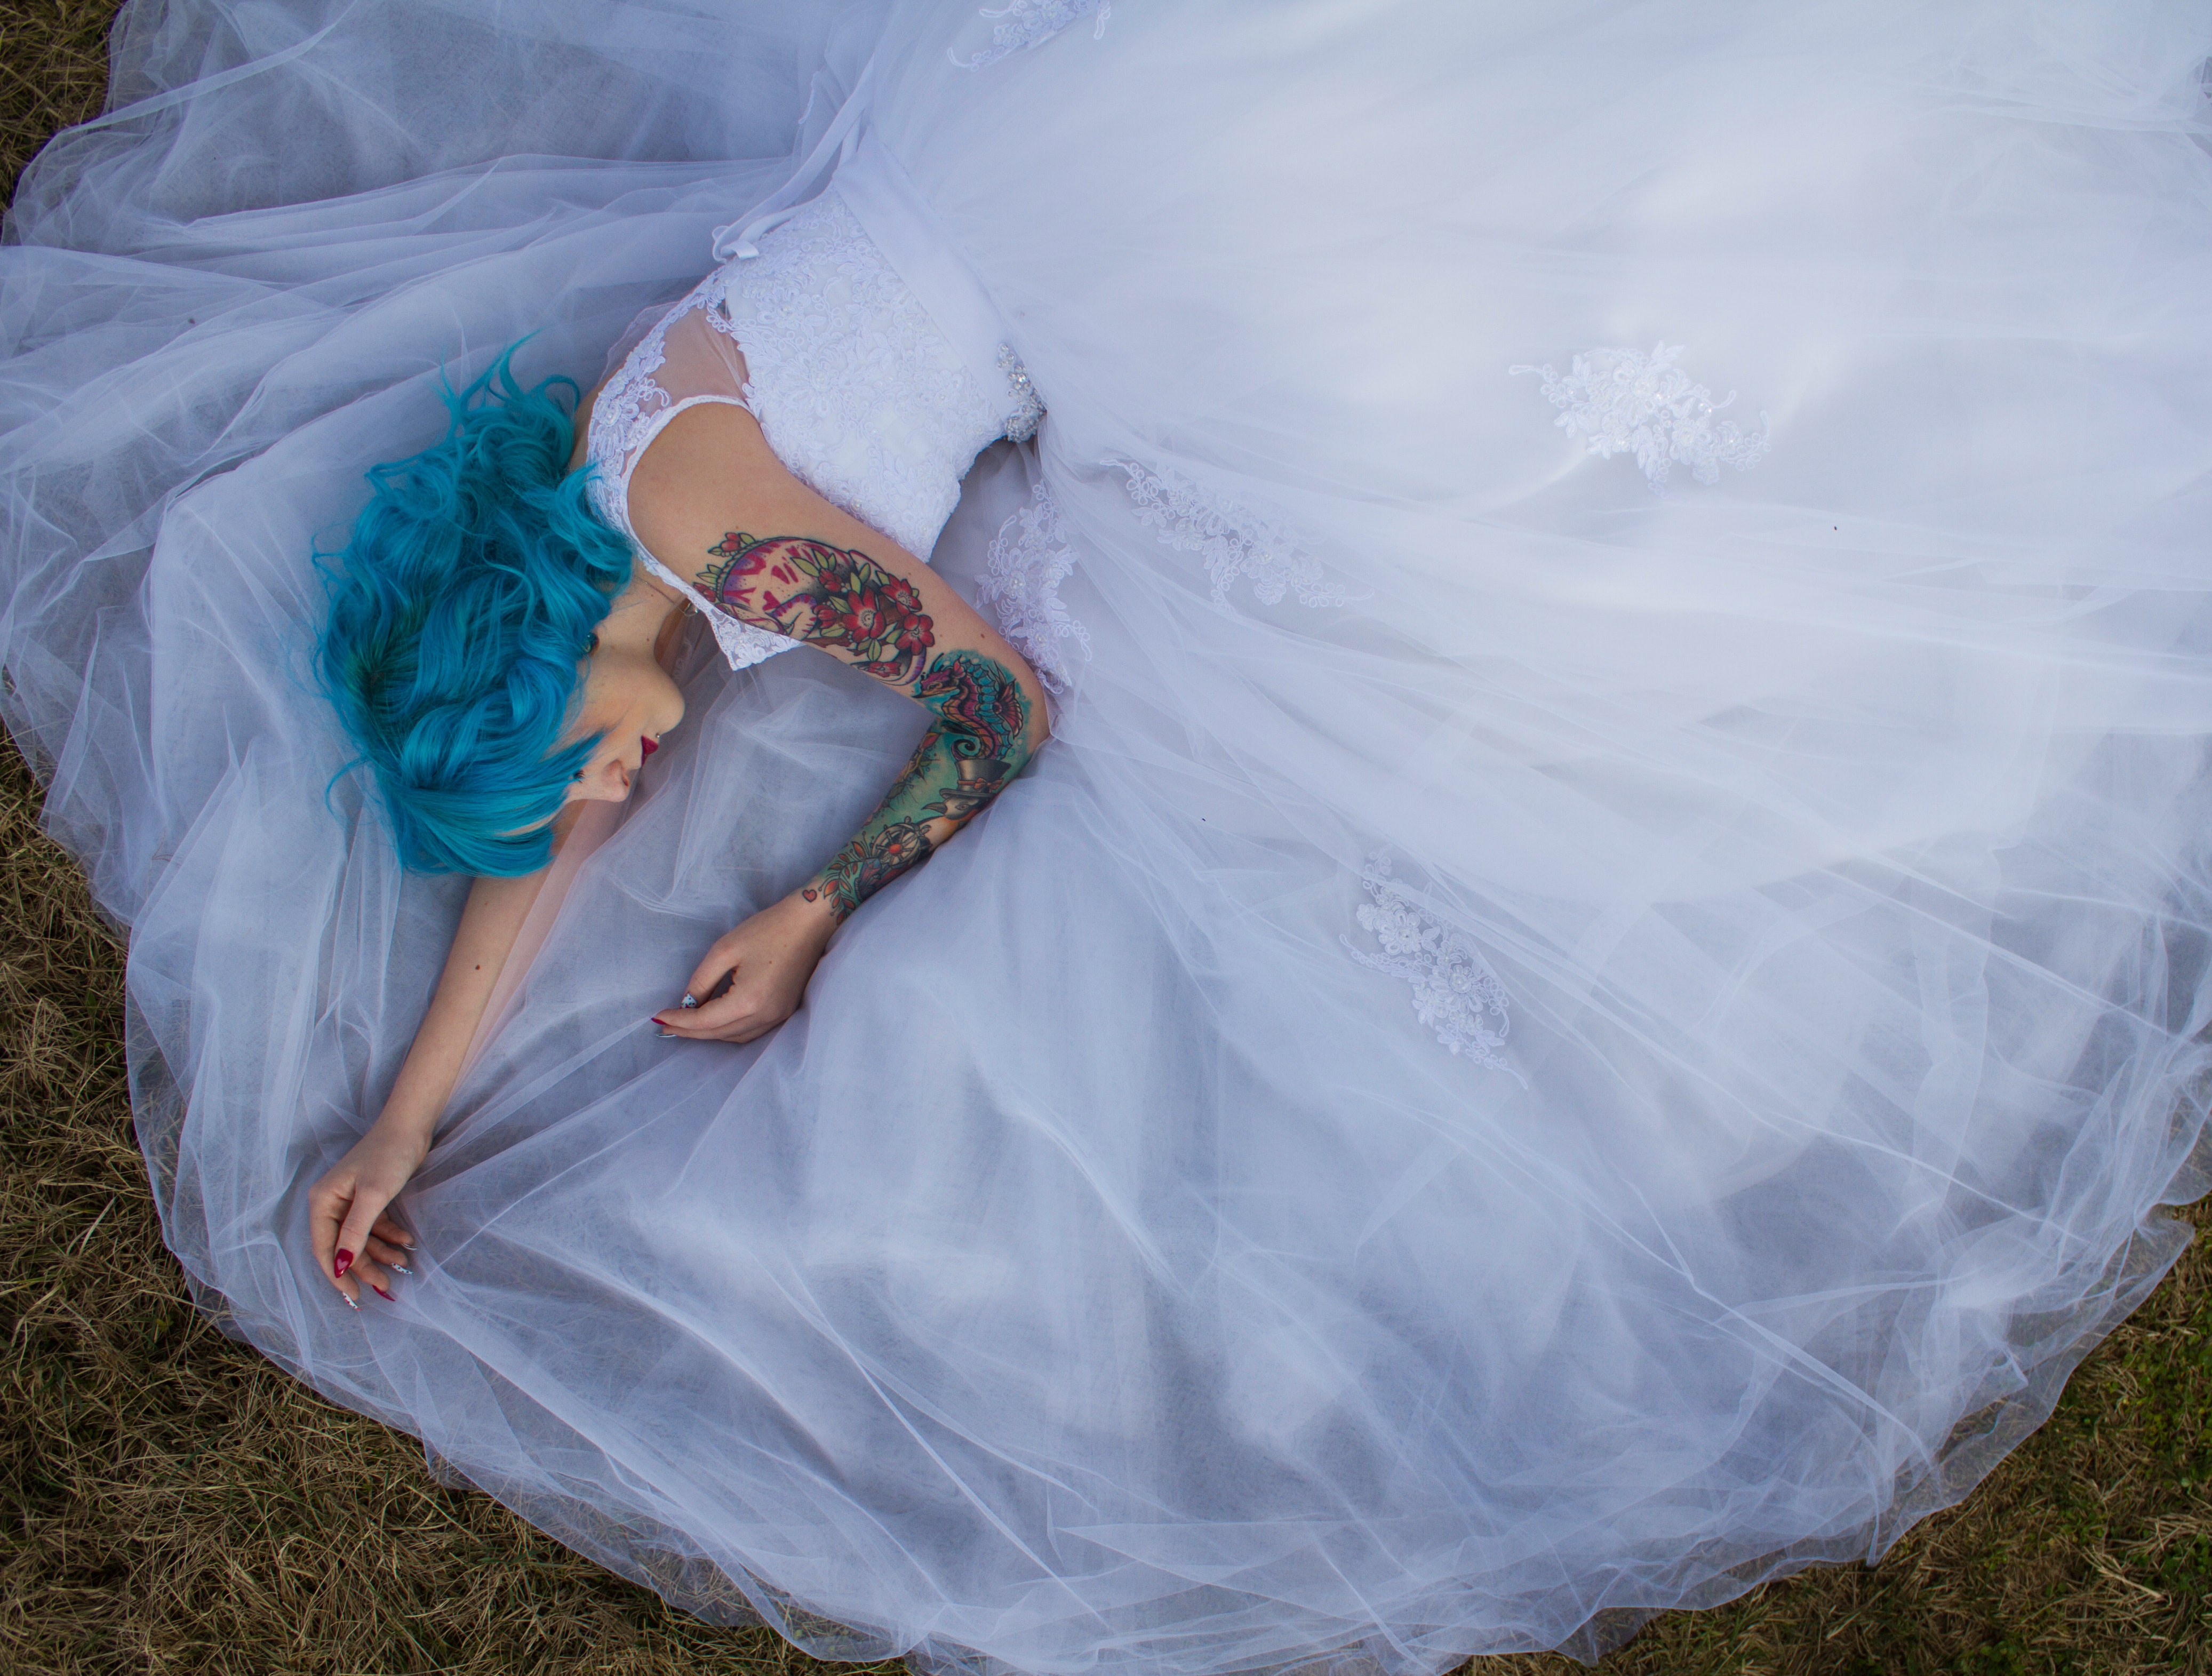 A blue-haired woman in a white lace wedding dress lying on green grass